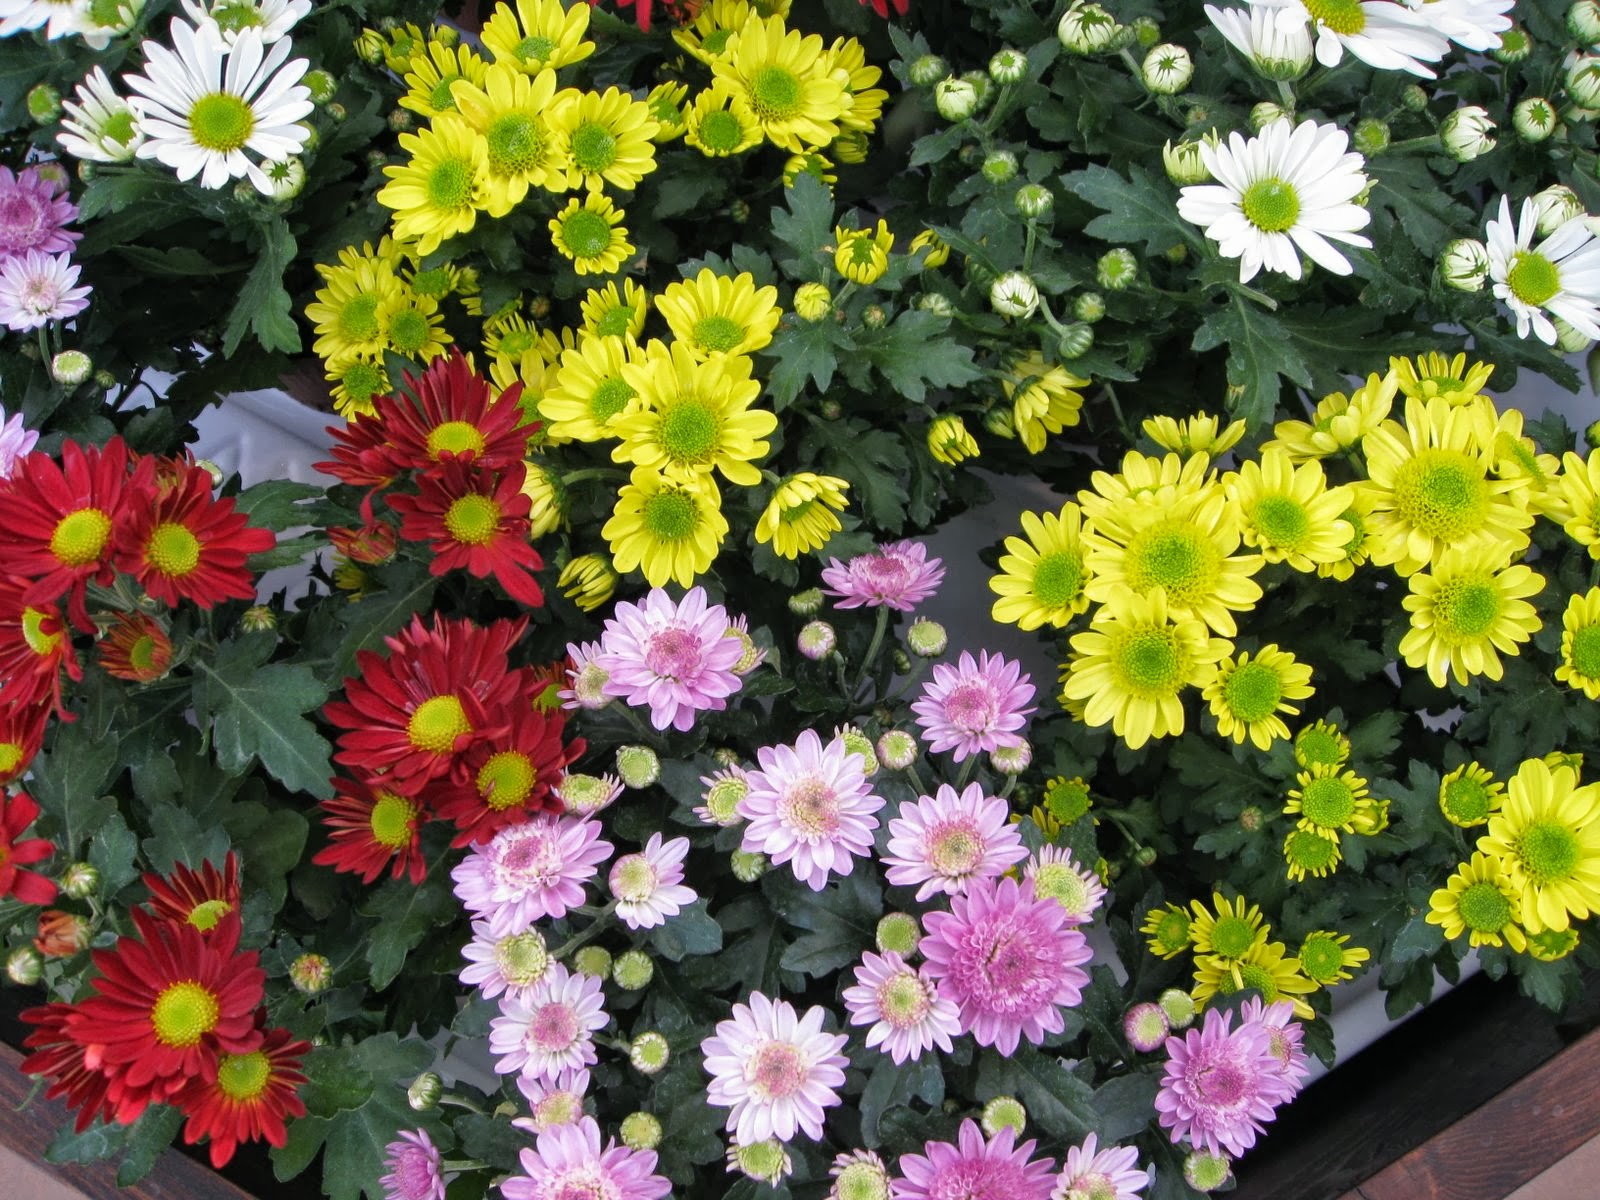  Meanings, Chrysanthemum Pictures, Chrysanthemum Colors click here